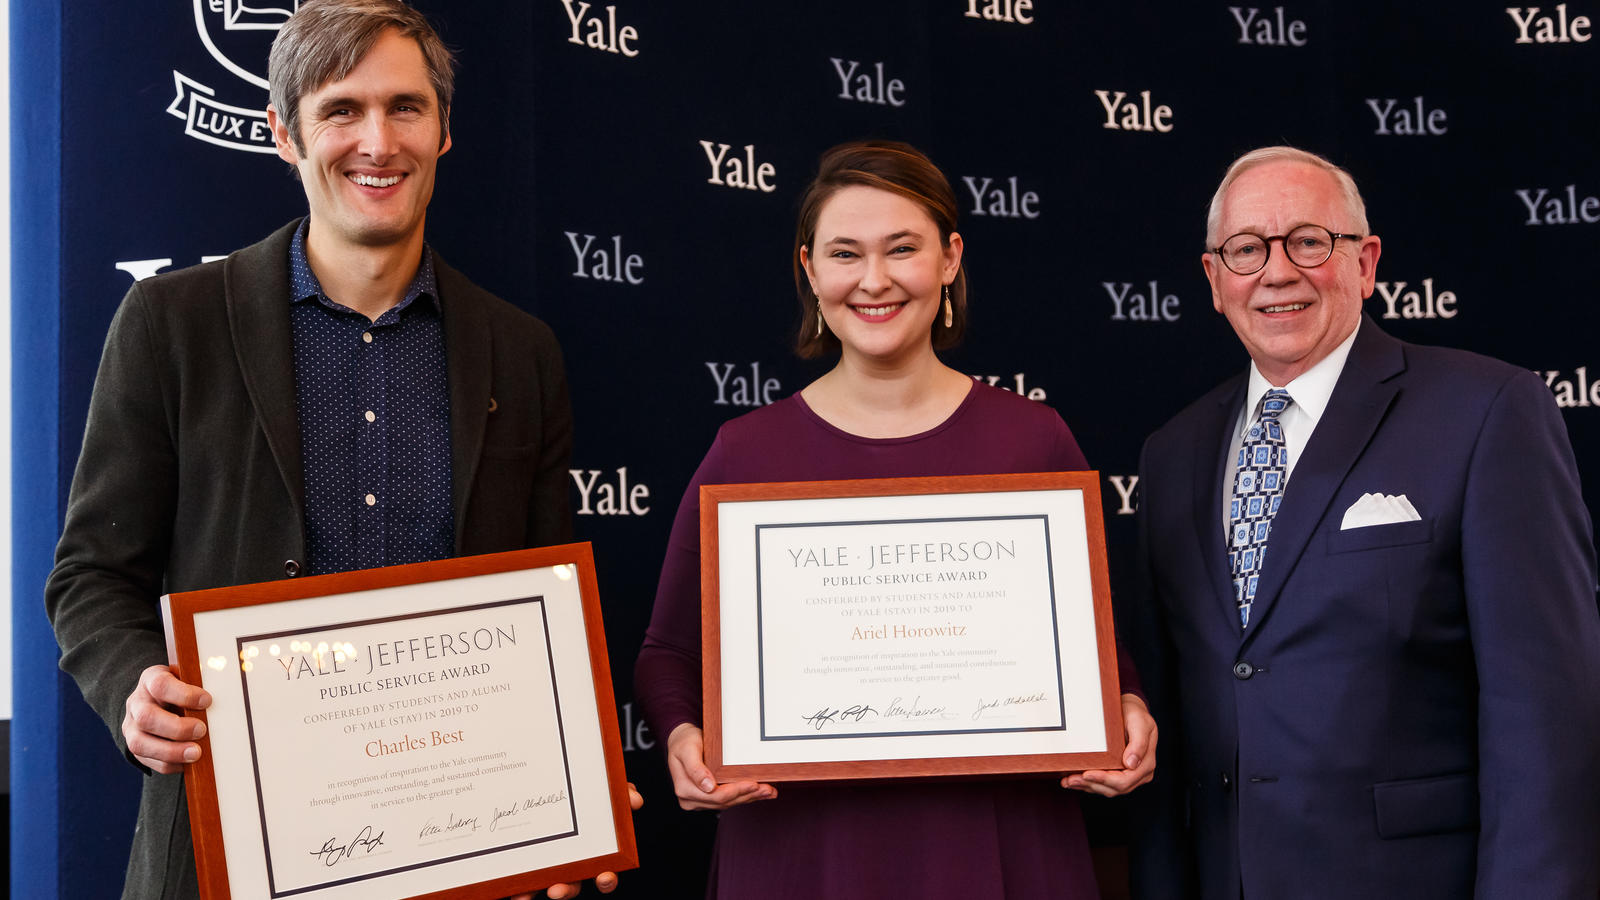 The 2019 Yale-Jefferson Award recipients with their certificates